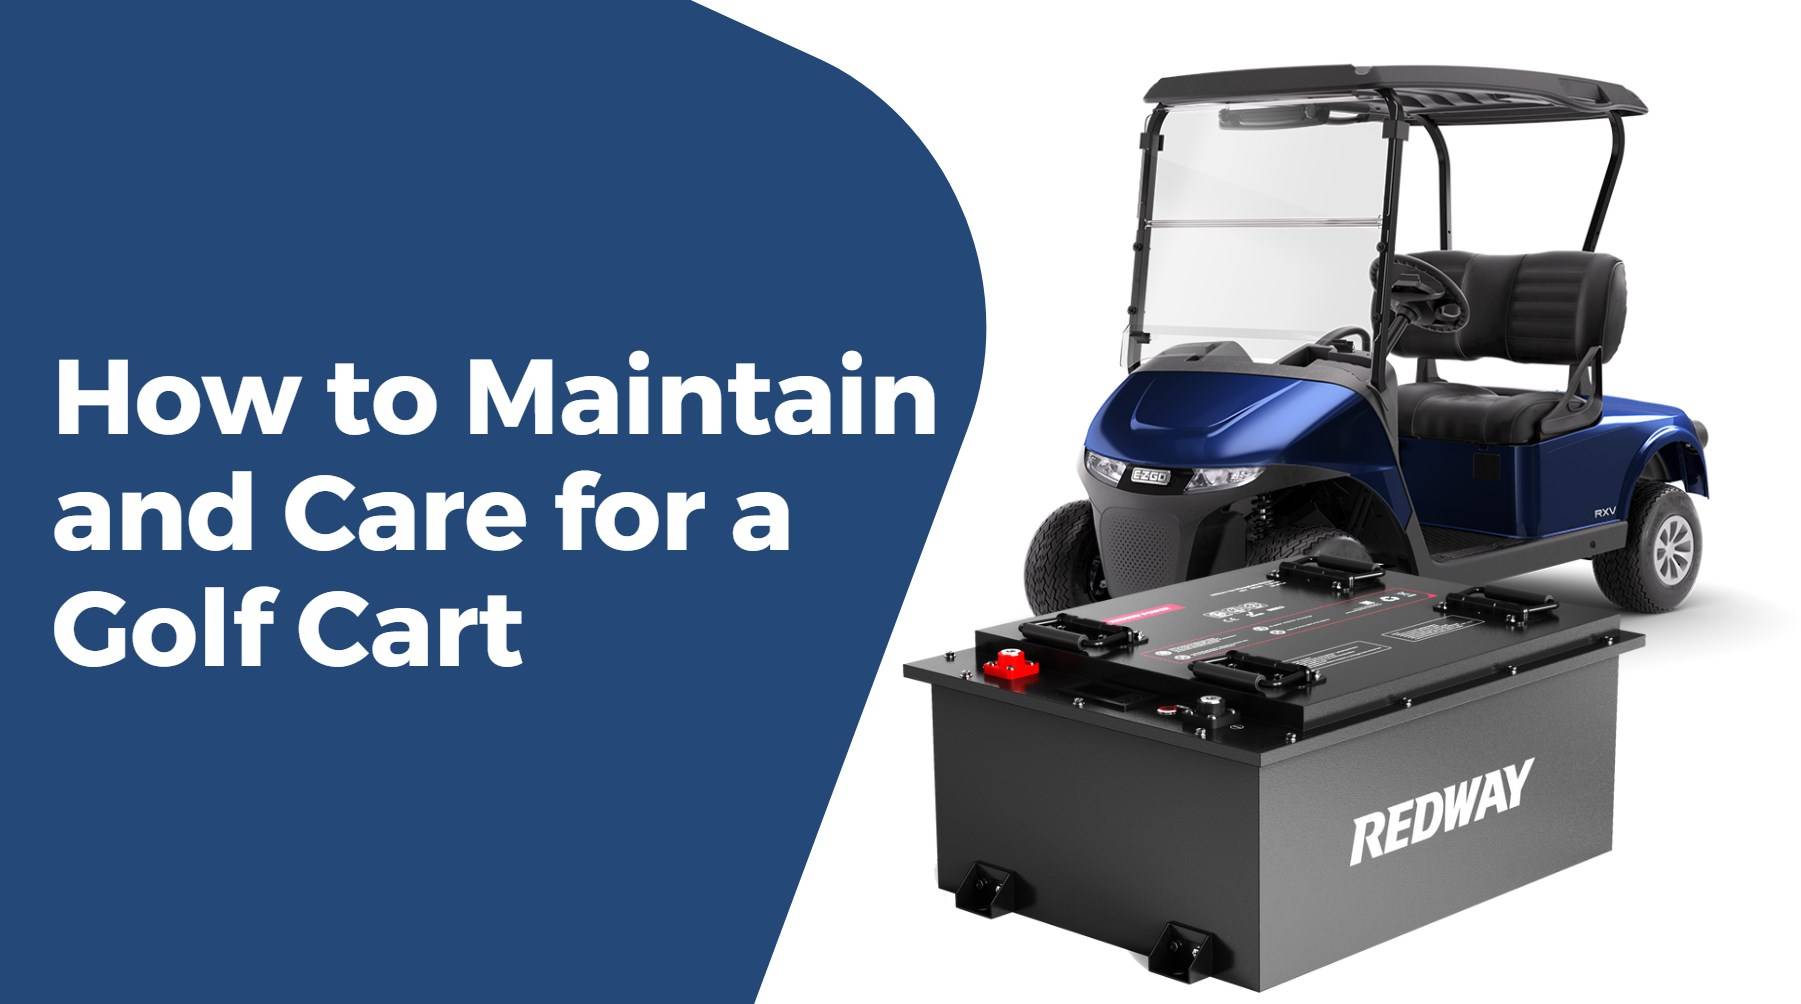 How to Maintain and Care for a Golf Cart